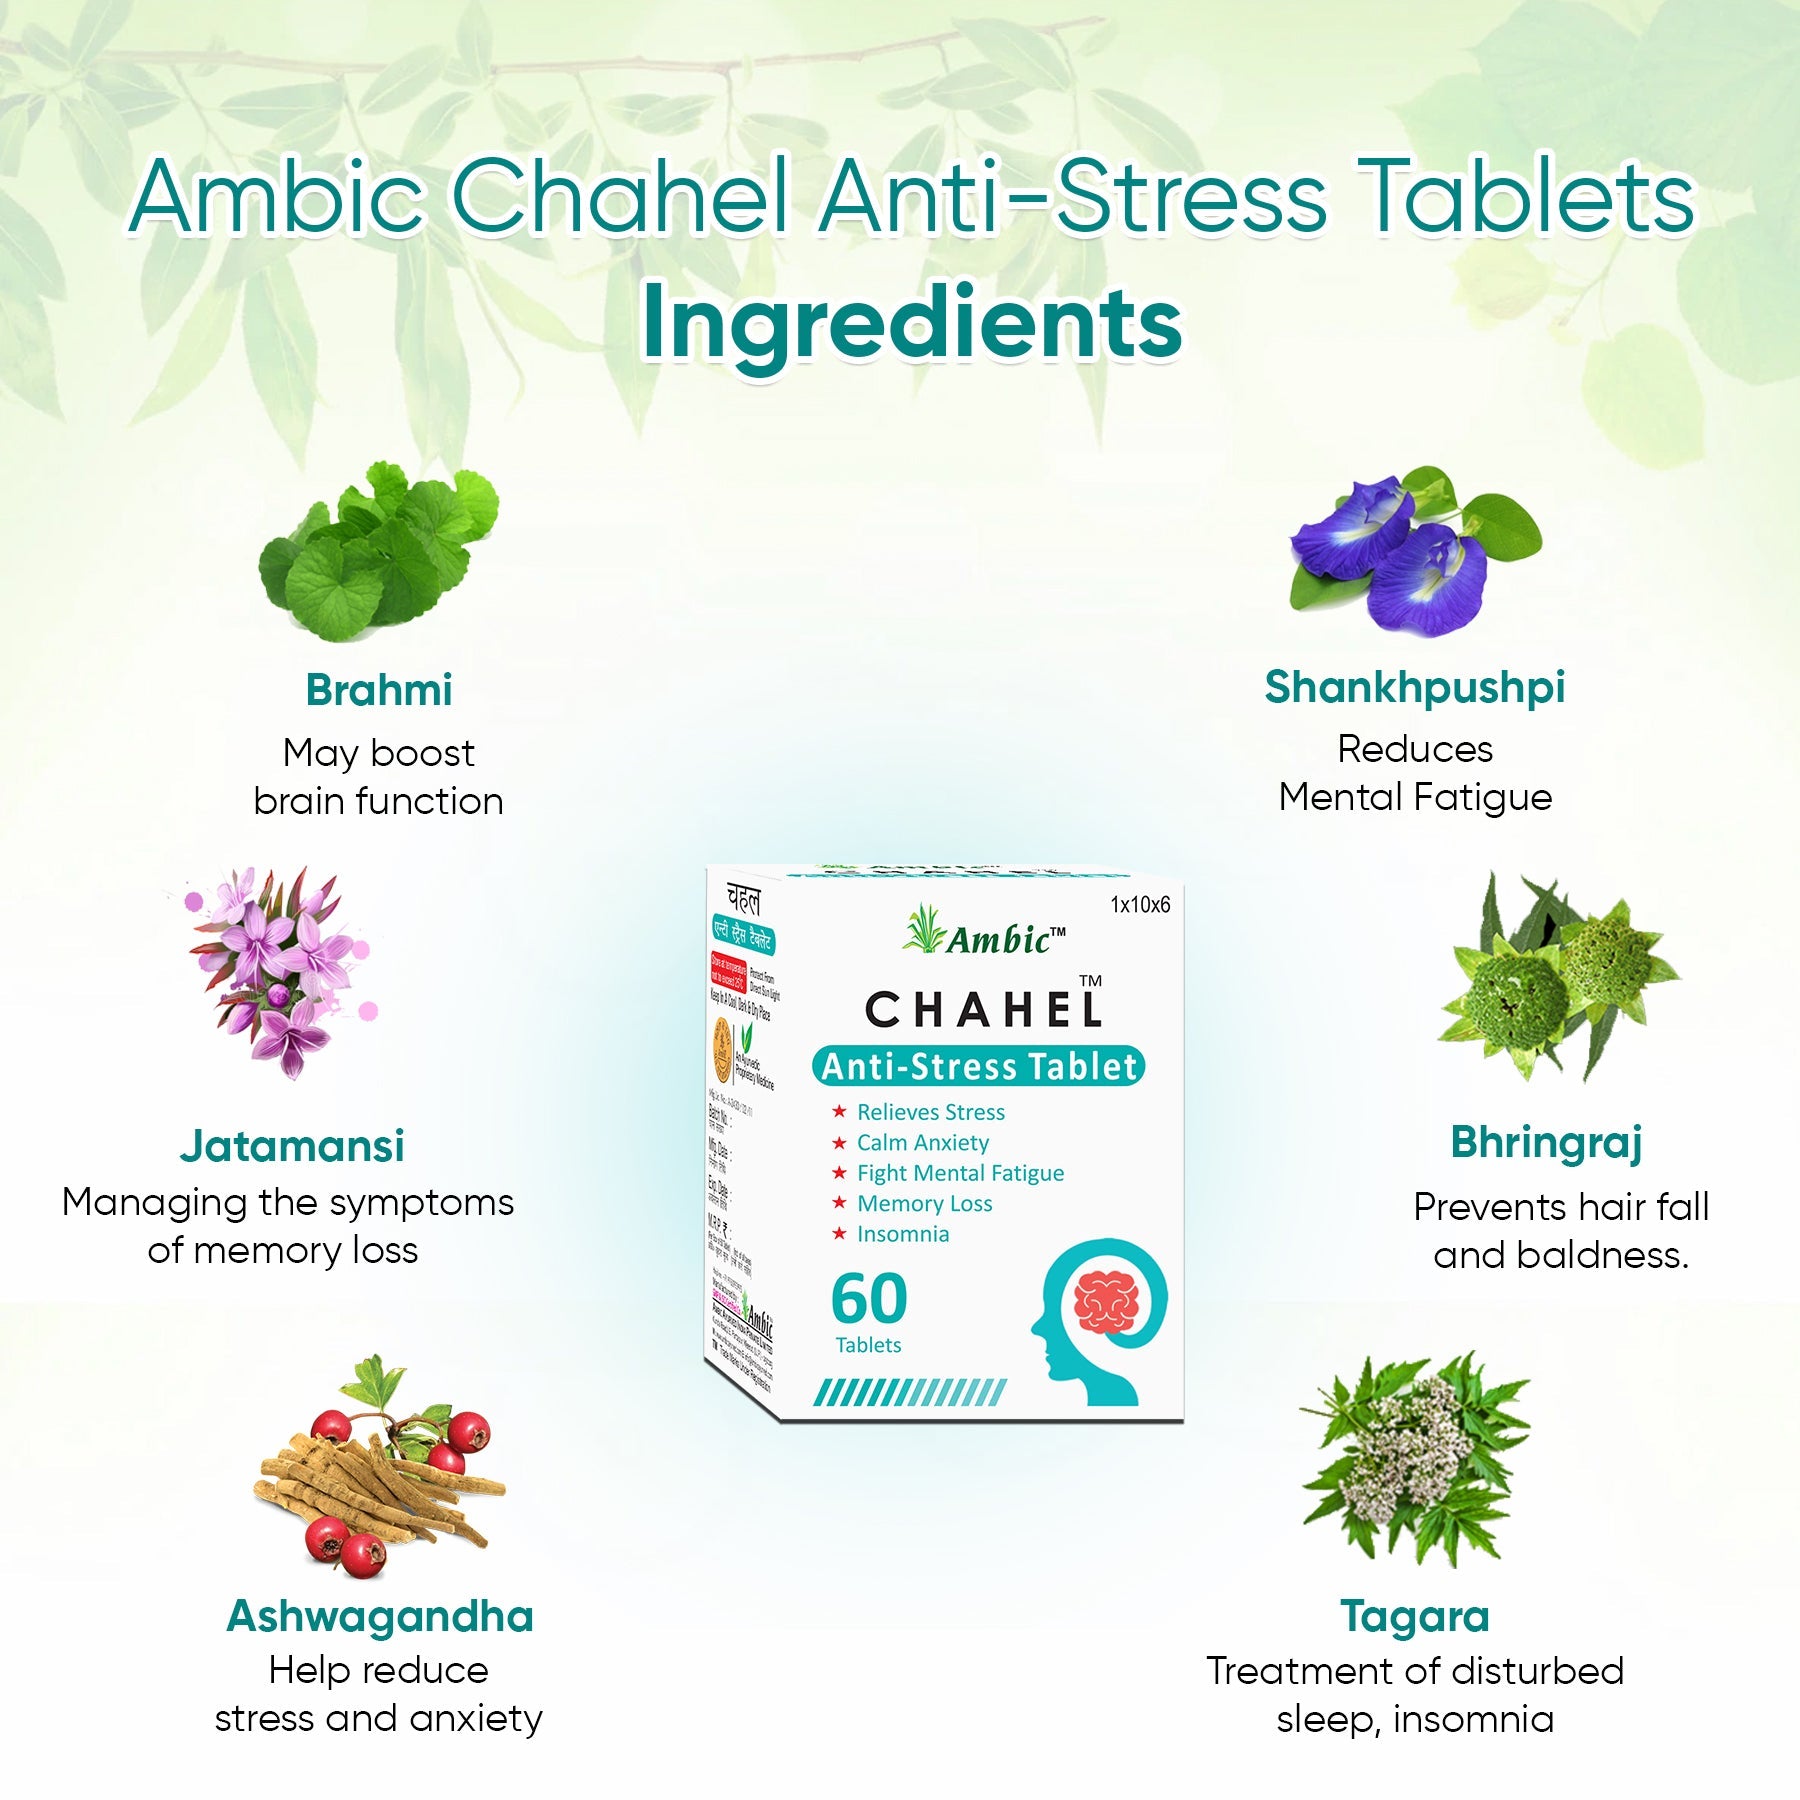 Ambic Chahel Anti-Stress Tablet